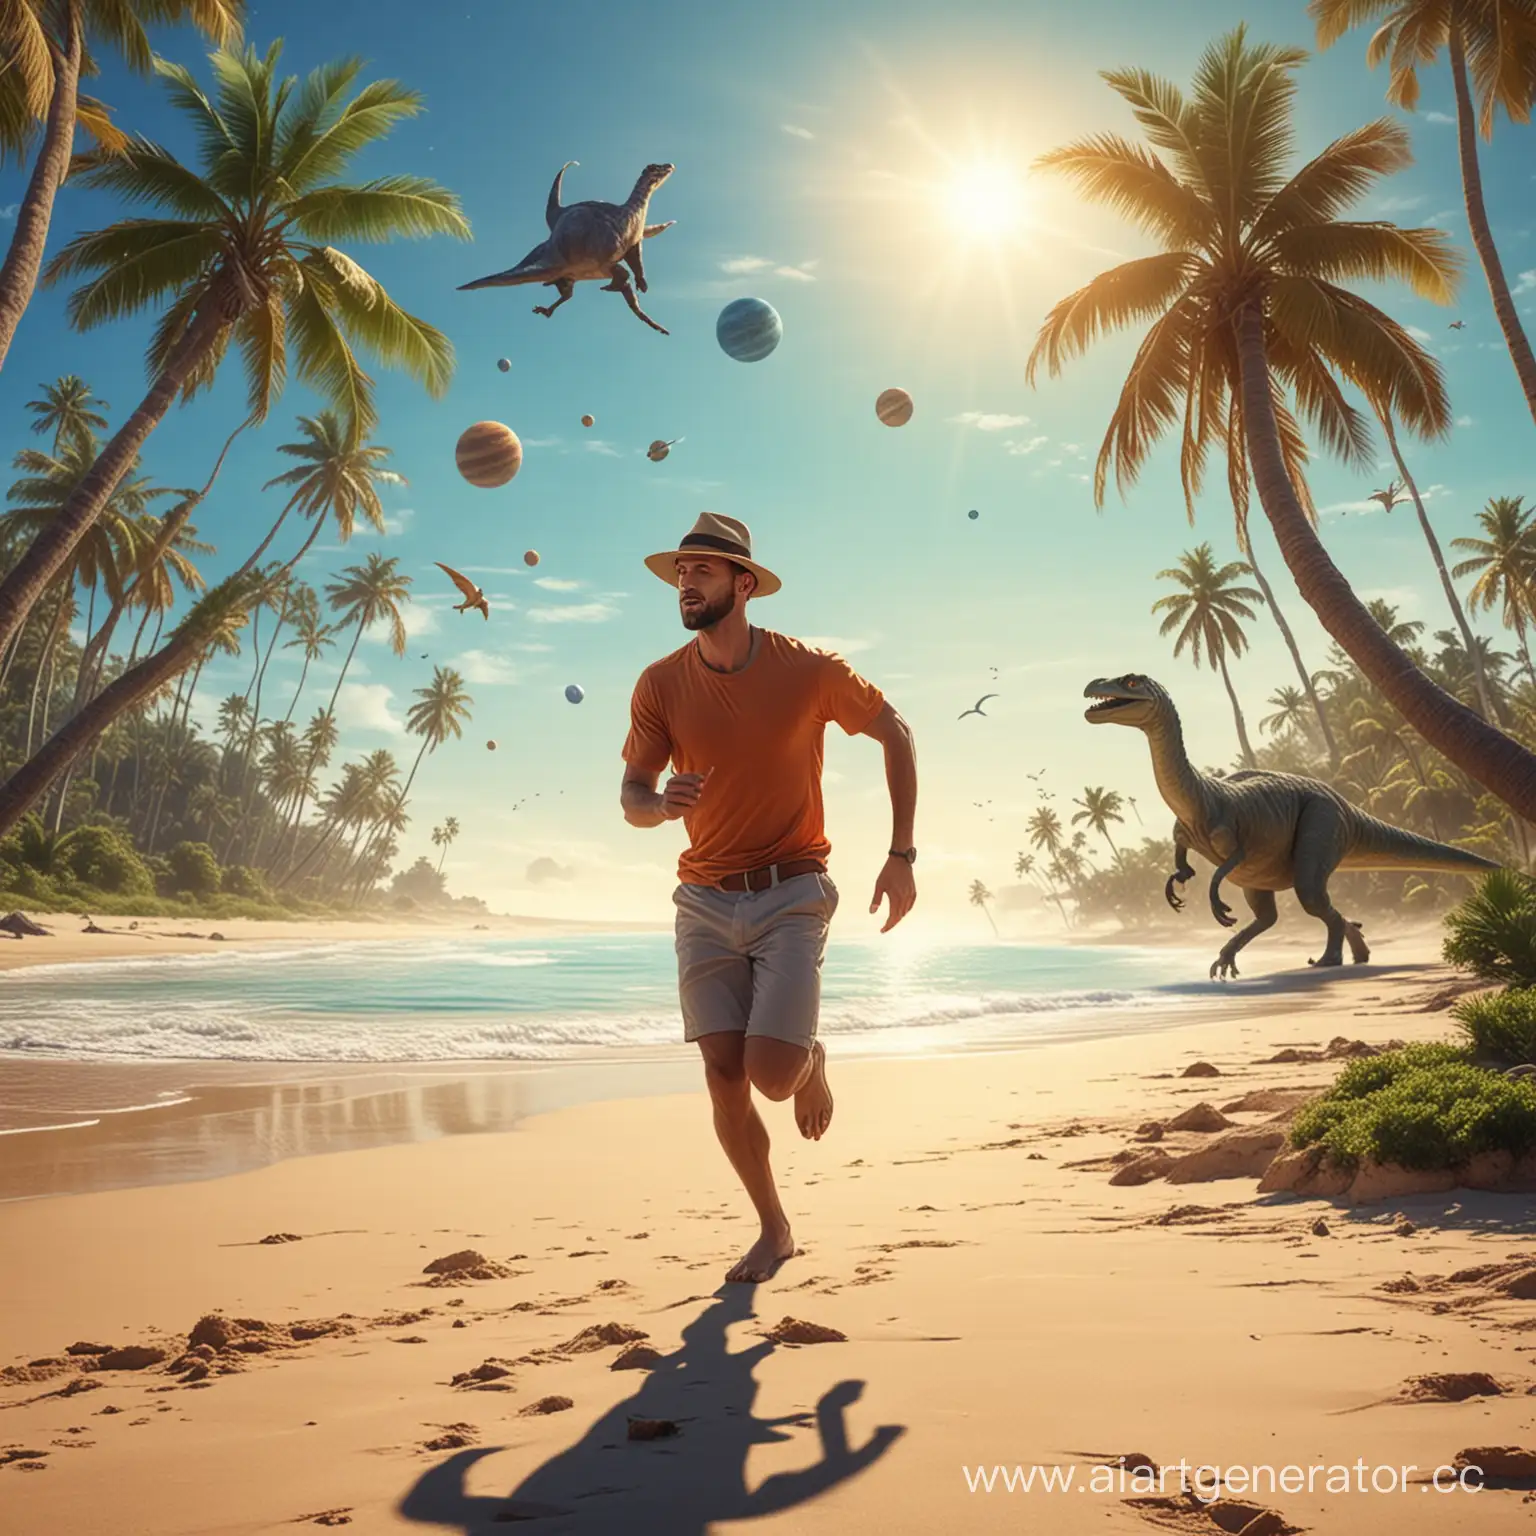 Man-in-Hat-Running-on-Beach-with-Dinosaur-and-Planet-Scenery